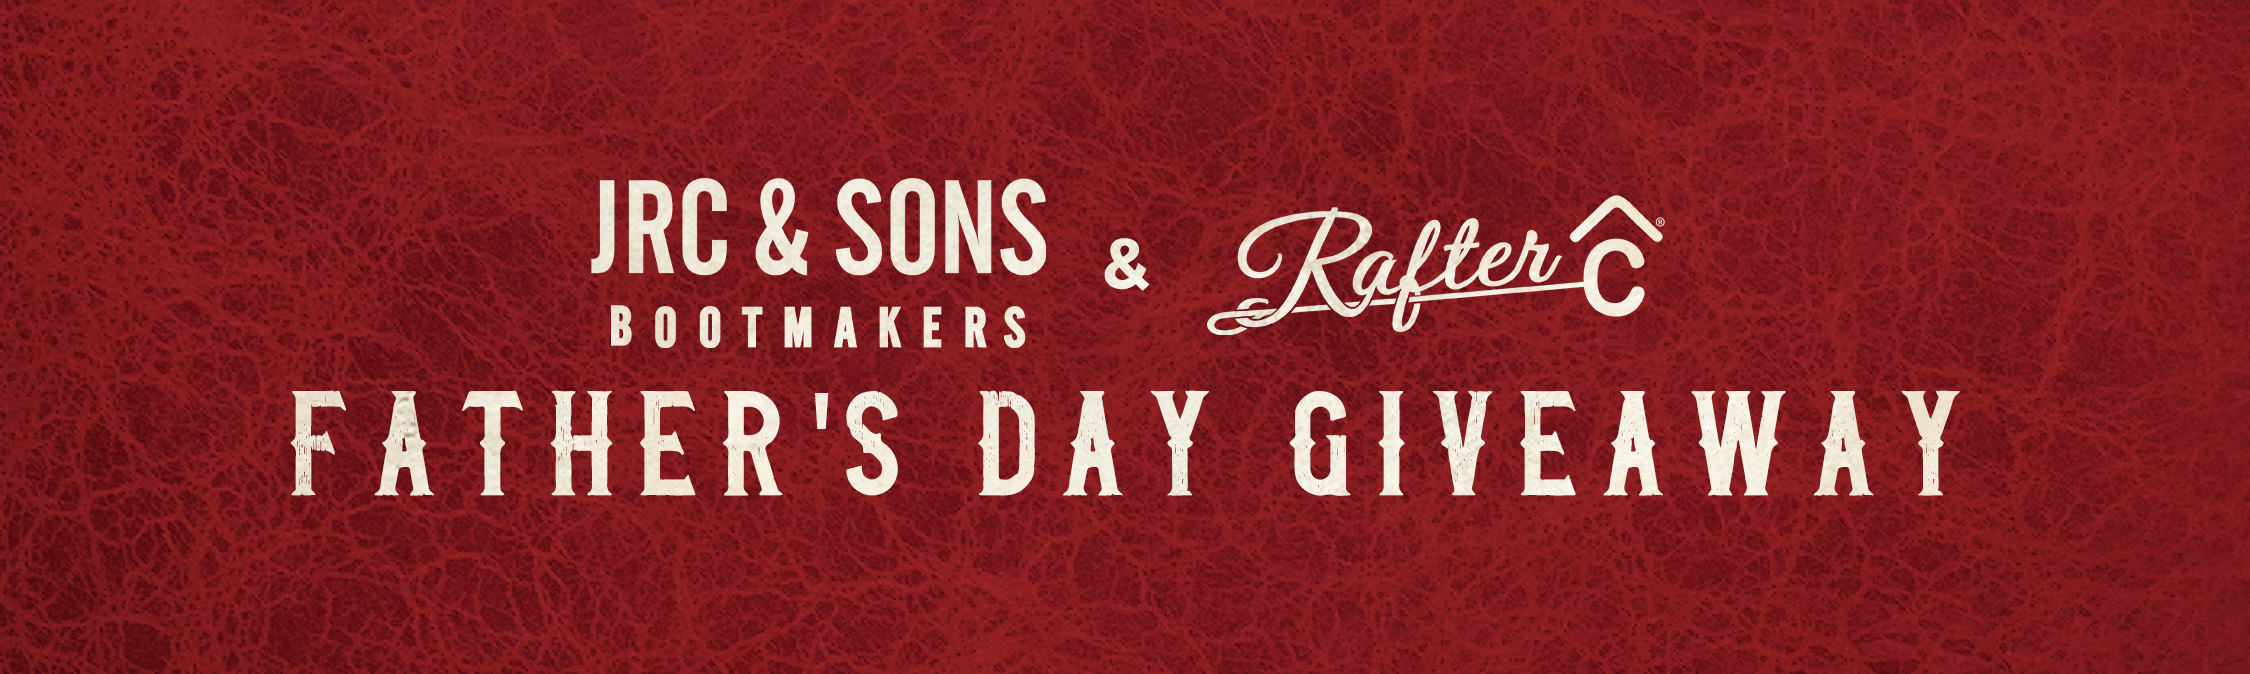 Enter to Win a Prize Pack from Rafter C and JRC & Sons for Father's Day